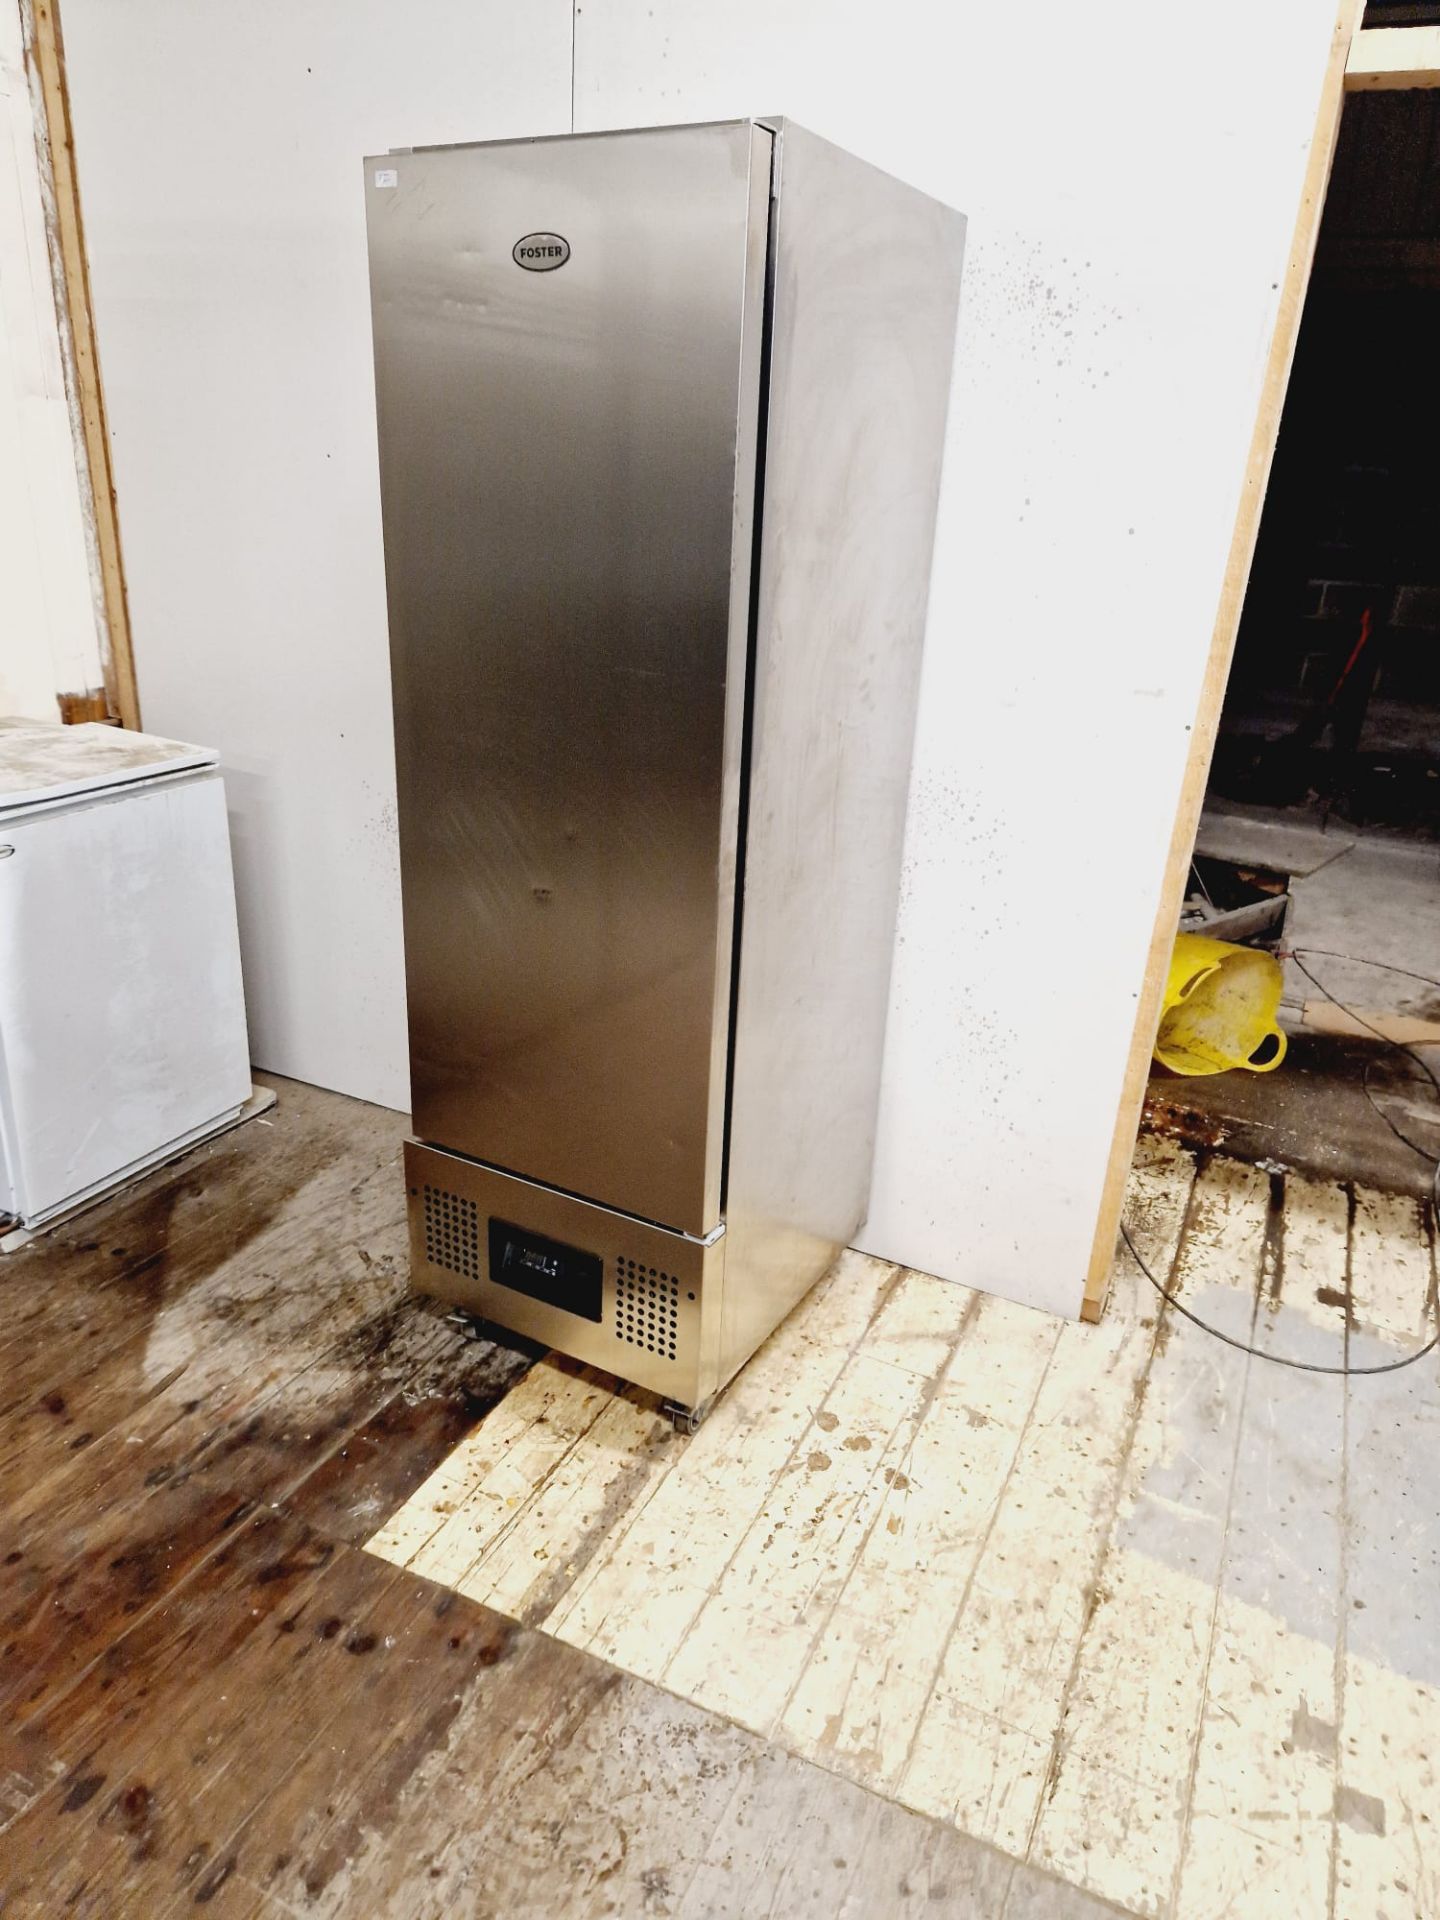 FOSTER SLIM LINE FREEZER - EP700 HSTB -18 TO -22 - FULLY SERVICED AND WORKING - Image 3 of 3